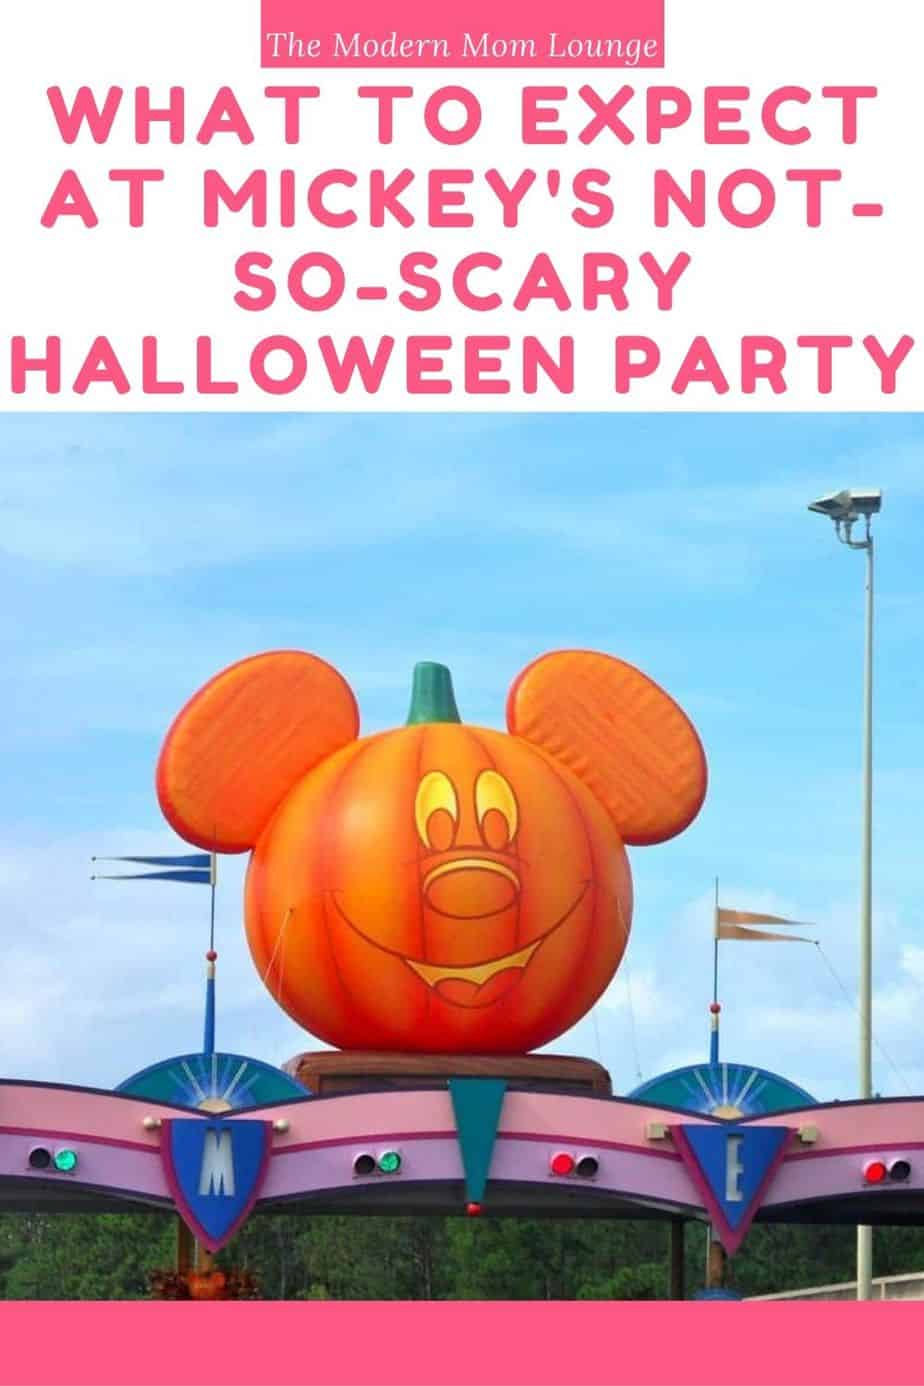 What to Expect at Mickey's Not-So-Scary Halloween Party